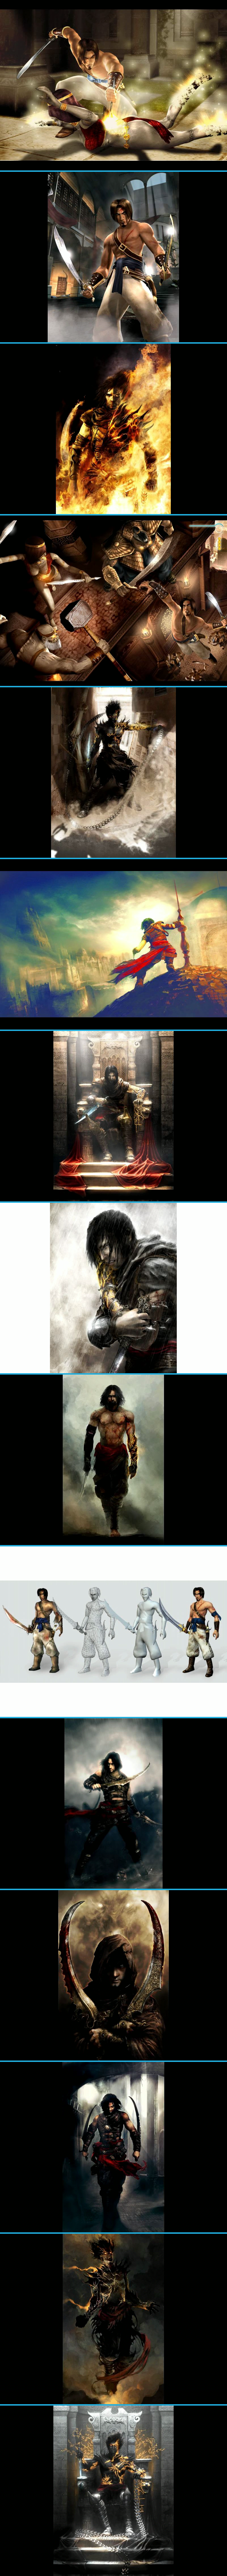 Prince of Persia: The Two Thrones - Artwork (The Prince)